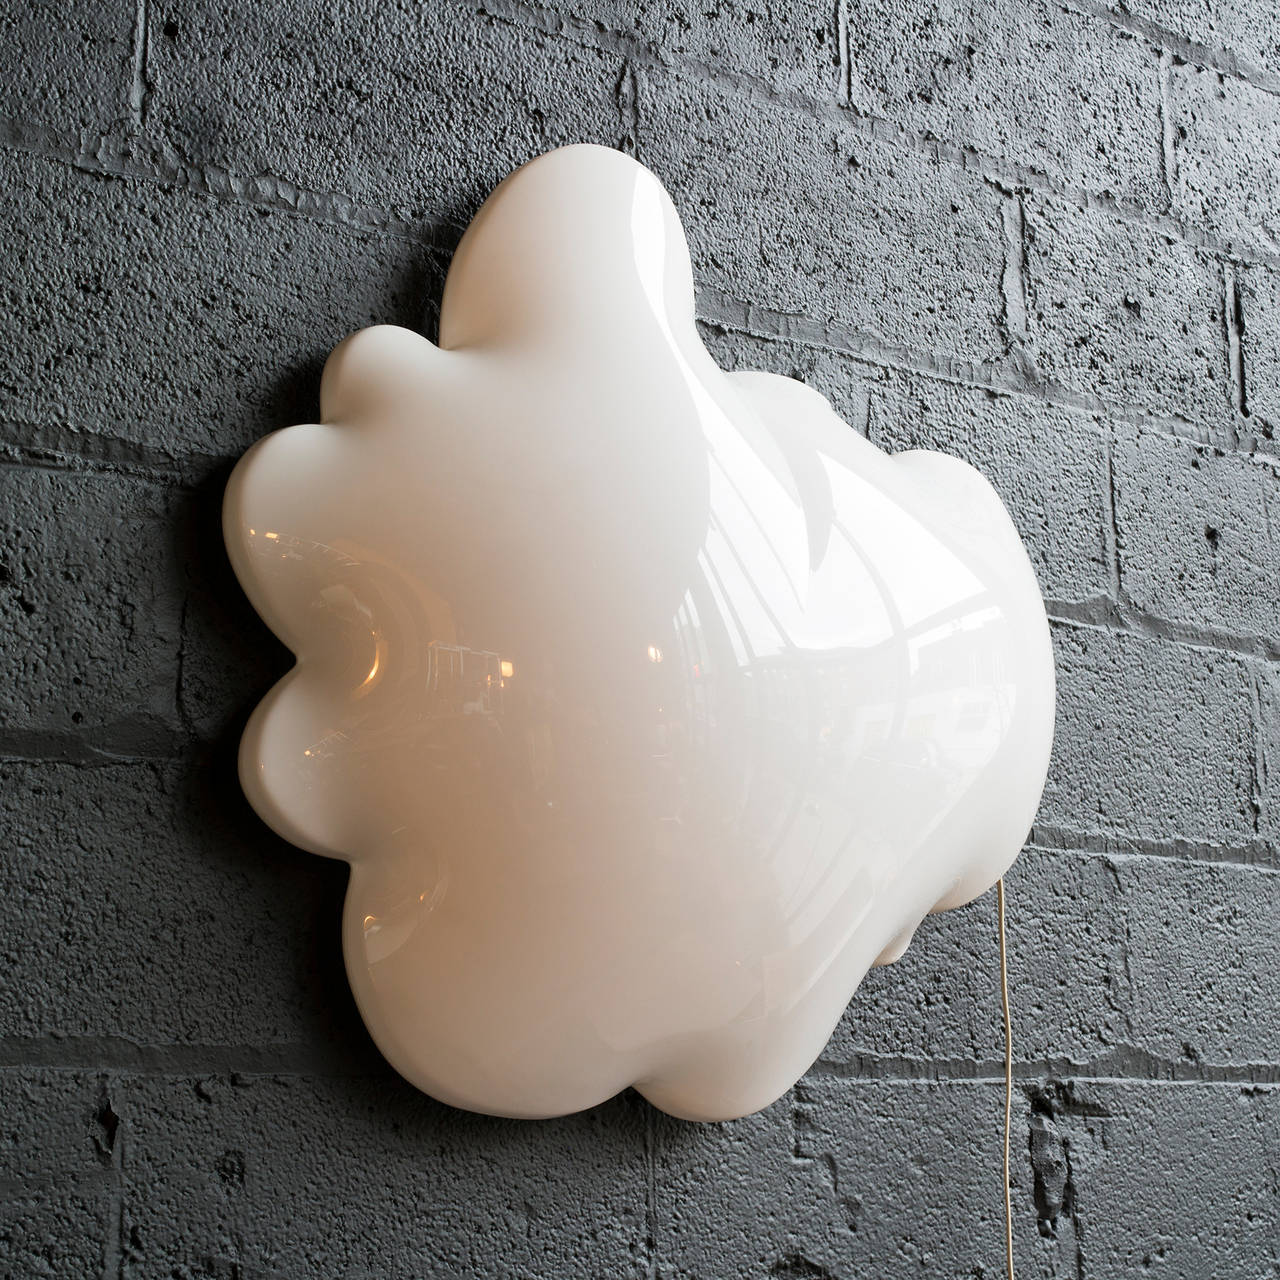 Charmingly bulbous acrylic cloud form over fluorescent fixture with original colored gels.